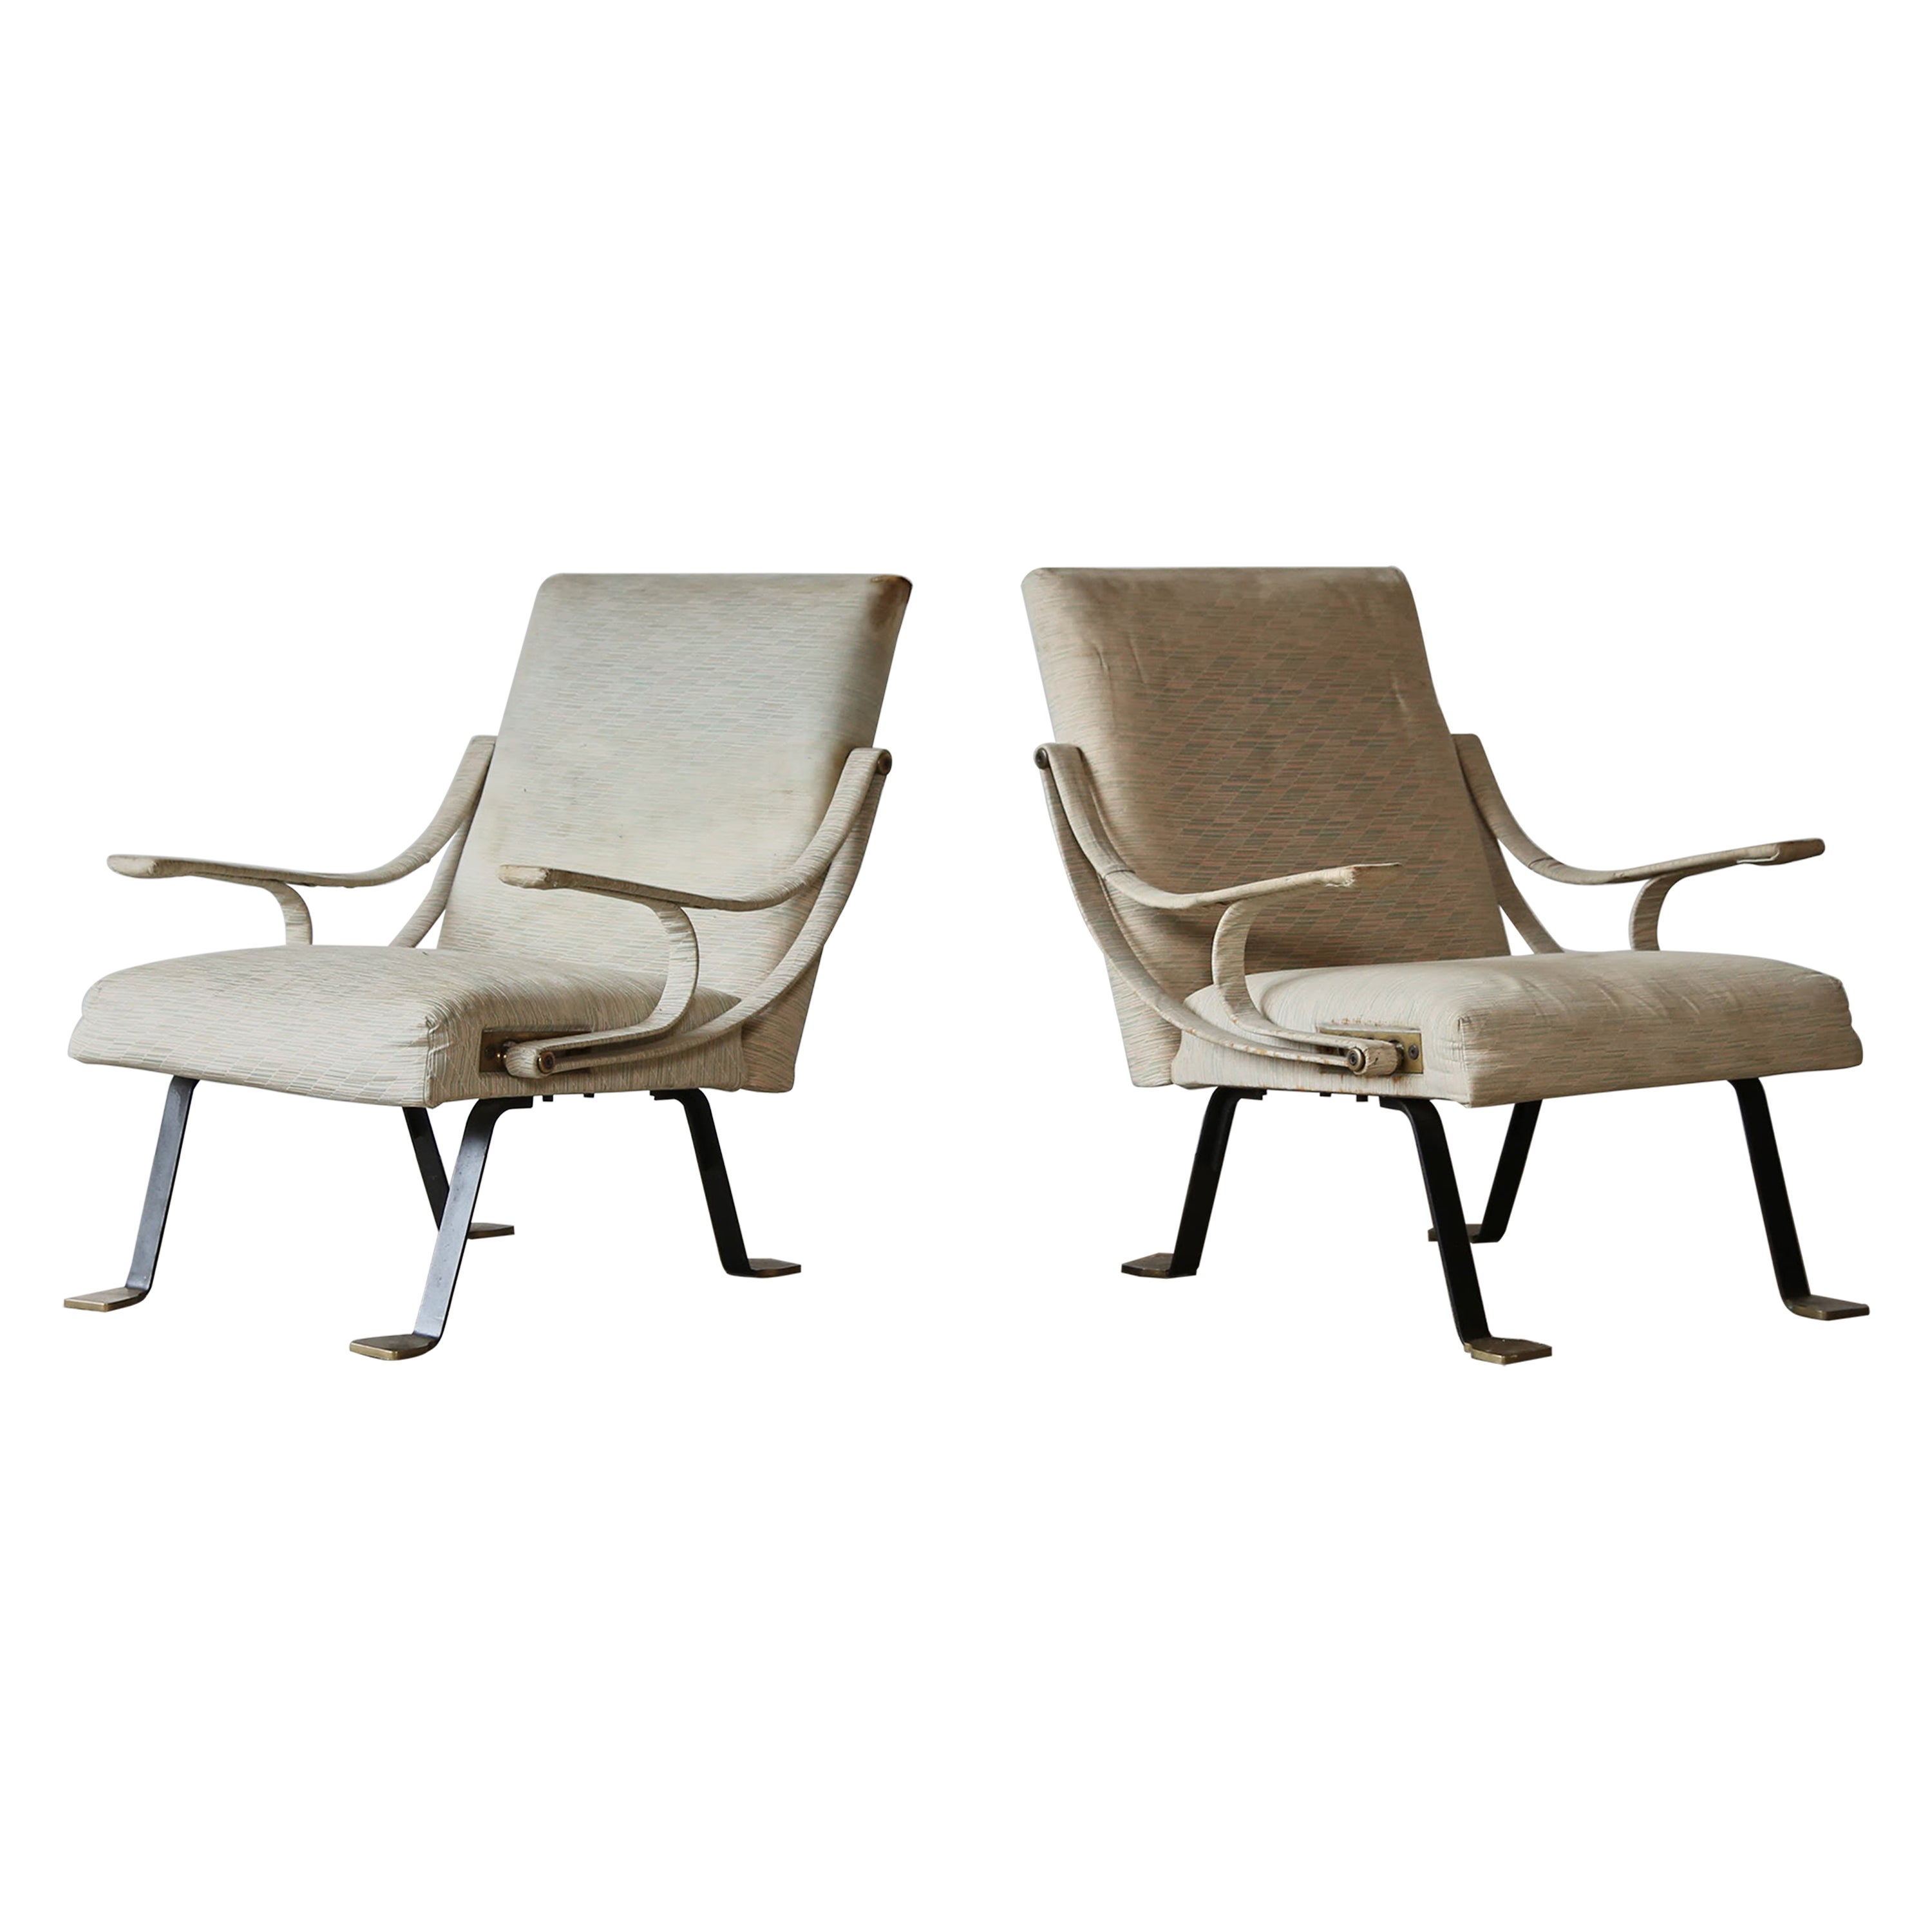 Ignazio Gardella Reclining Digamma Chairs, 1960s, Italy, For Reupholstery